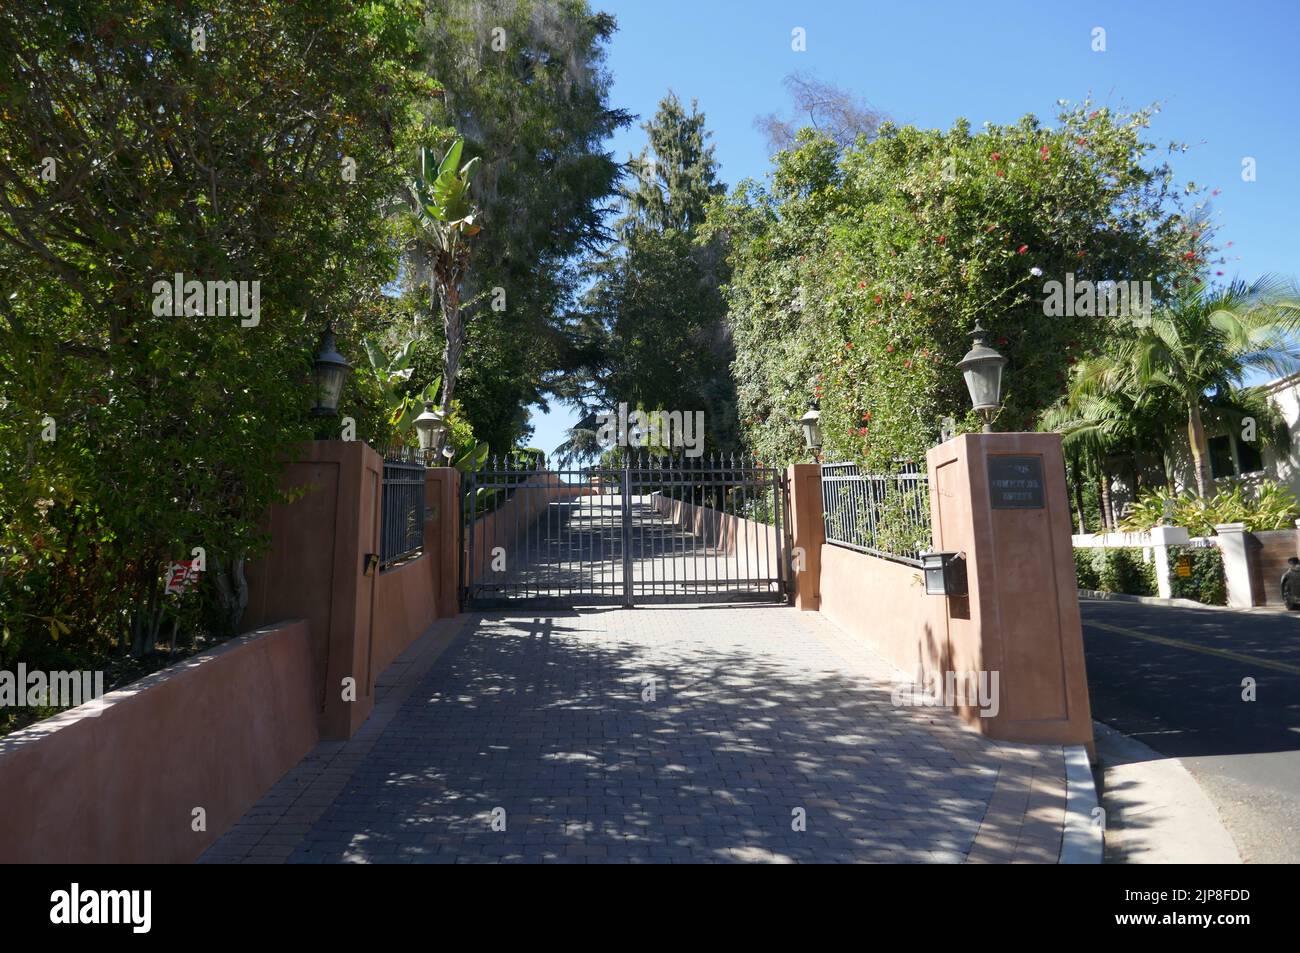 Beverly Hills, California, USA 15th August 2022 Actor Charlie Chaplin's Former Home/Estate at 1085 Summit Drive on August 15, 2022 in Beverly Hills, California, USA. Photo by Barry King/Alamy Stock Photo Stock Photo